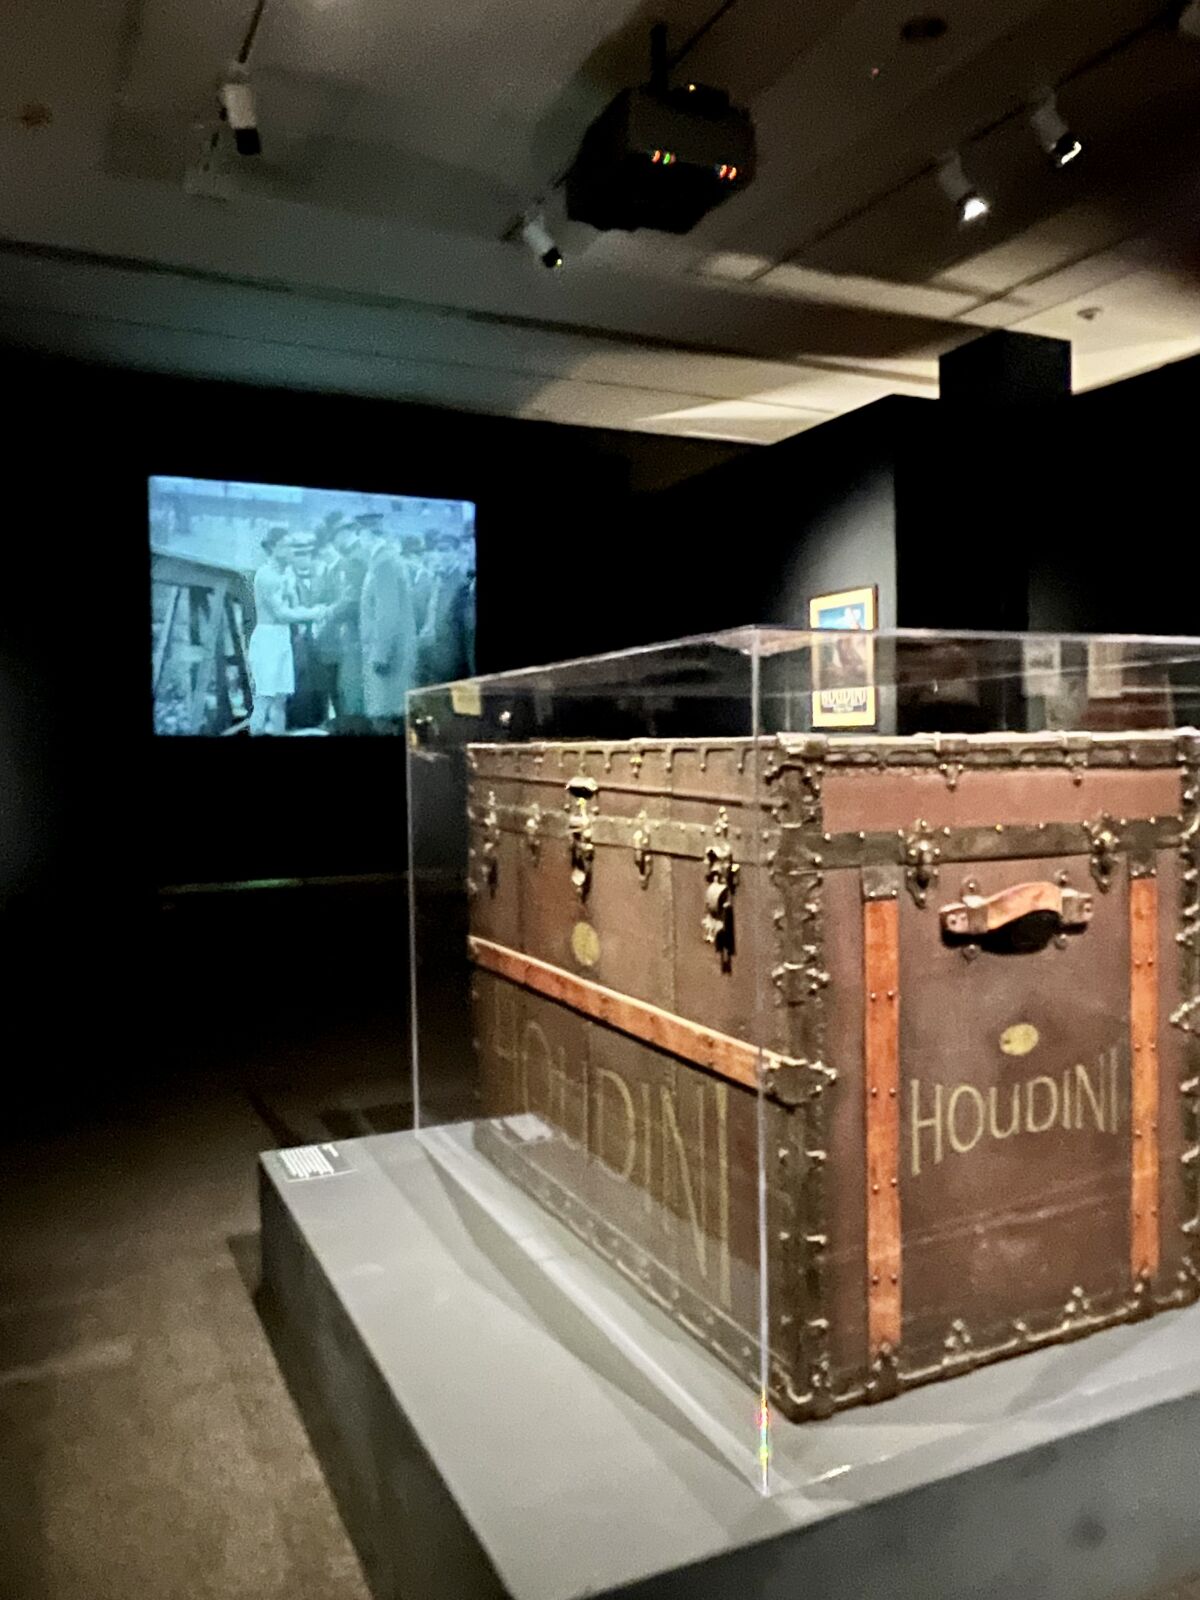 The Metamorphosis trunk used in Houdini's first act.